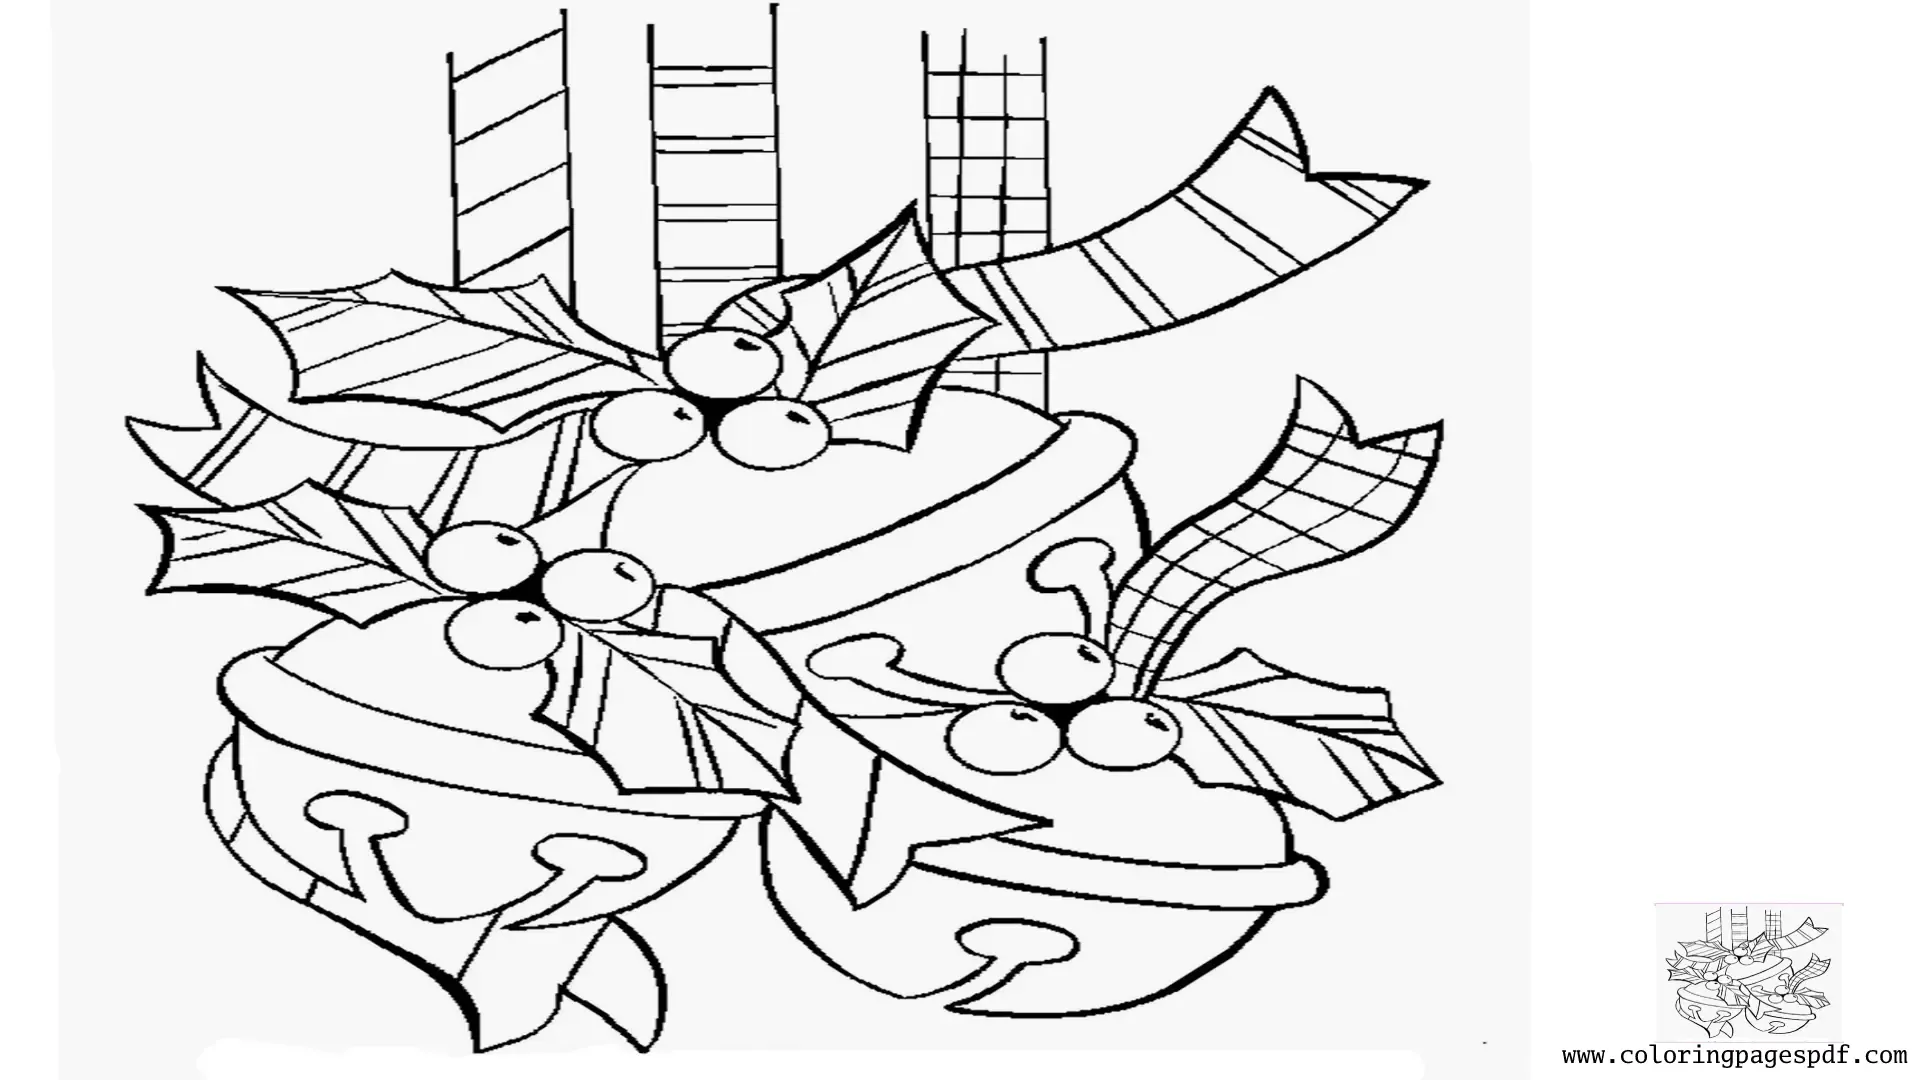 Coloring Page Of Christmas Bell Balls